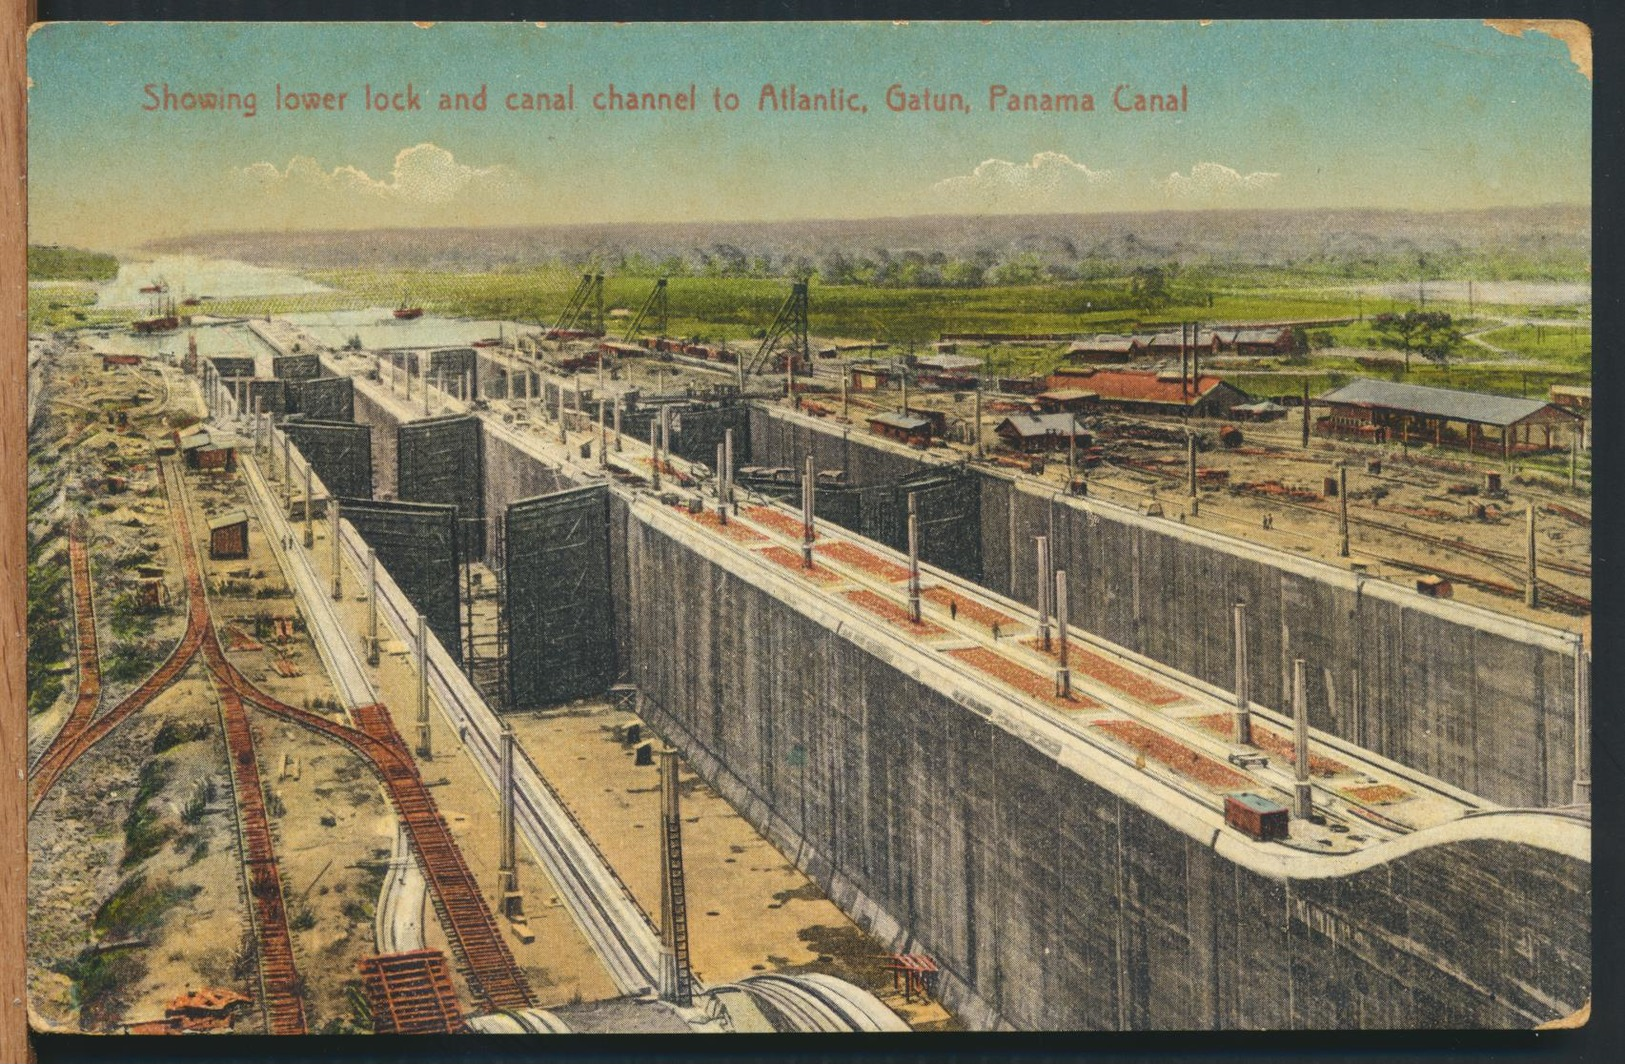 °°° 12048 - PANAMA , GATUN , SHOWING LOWER LOCK AND CANAL CHANNEL TO ATLANTIC - 1918 °°° - Panamá